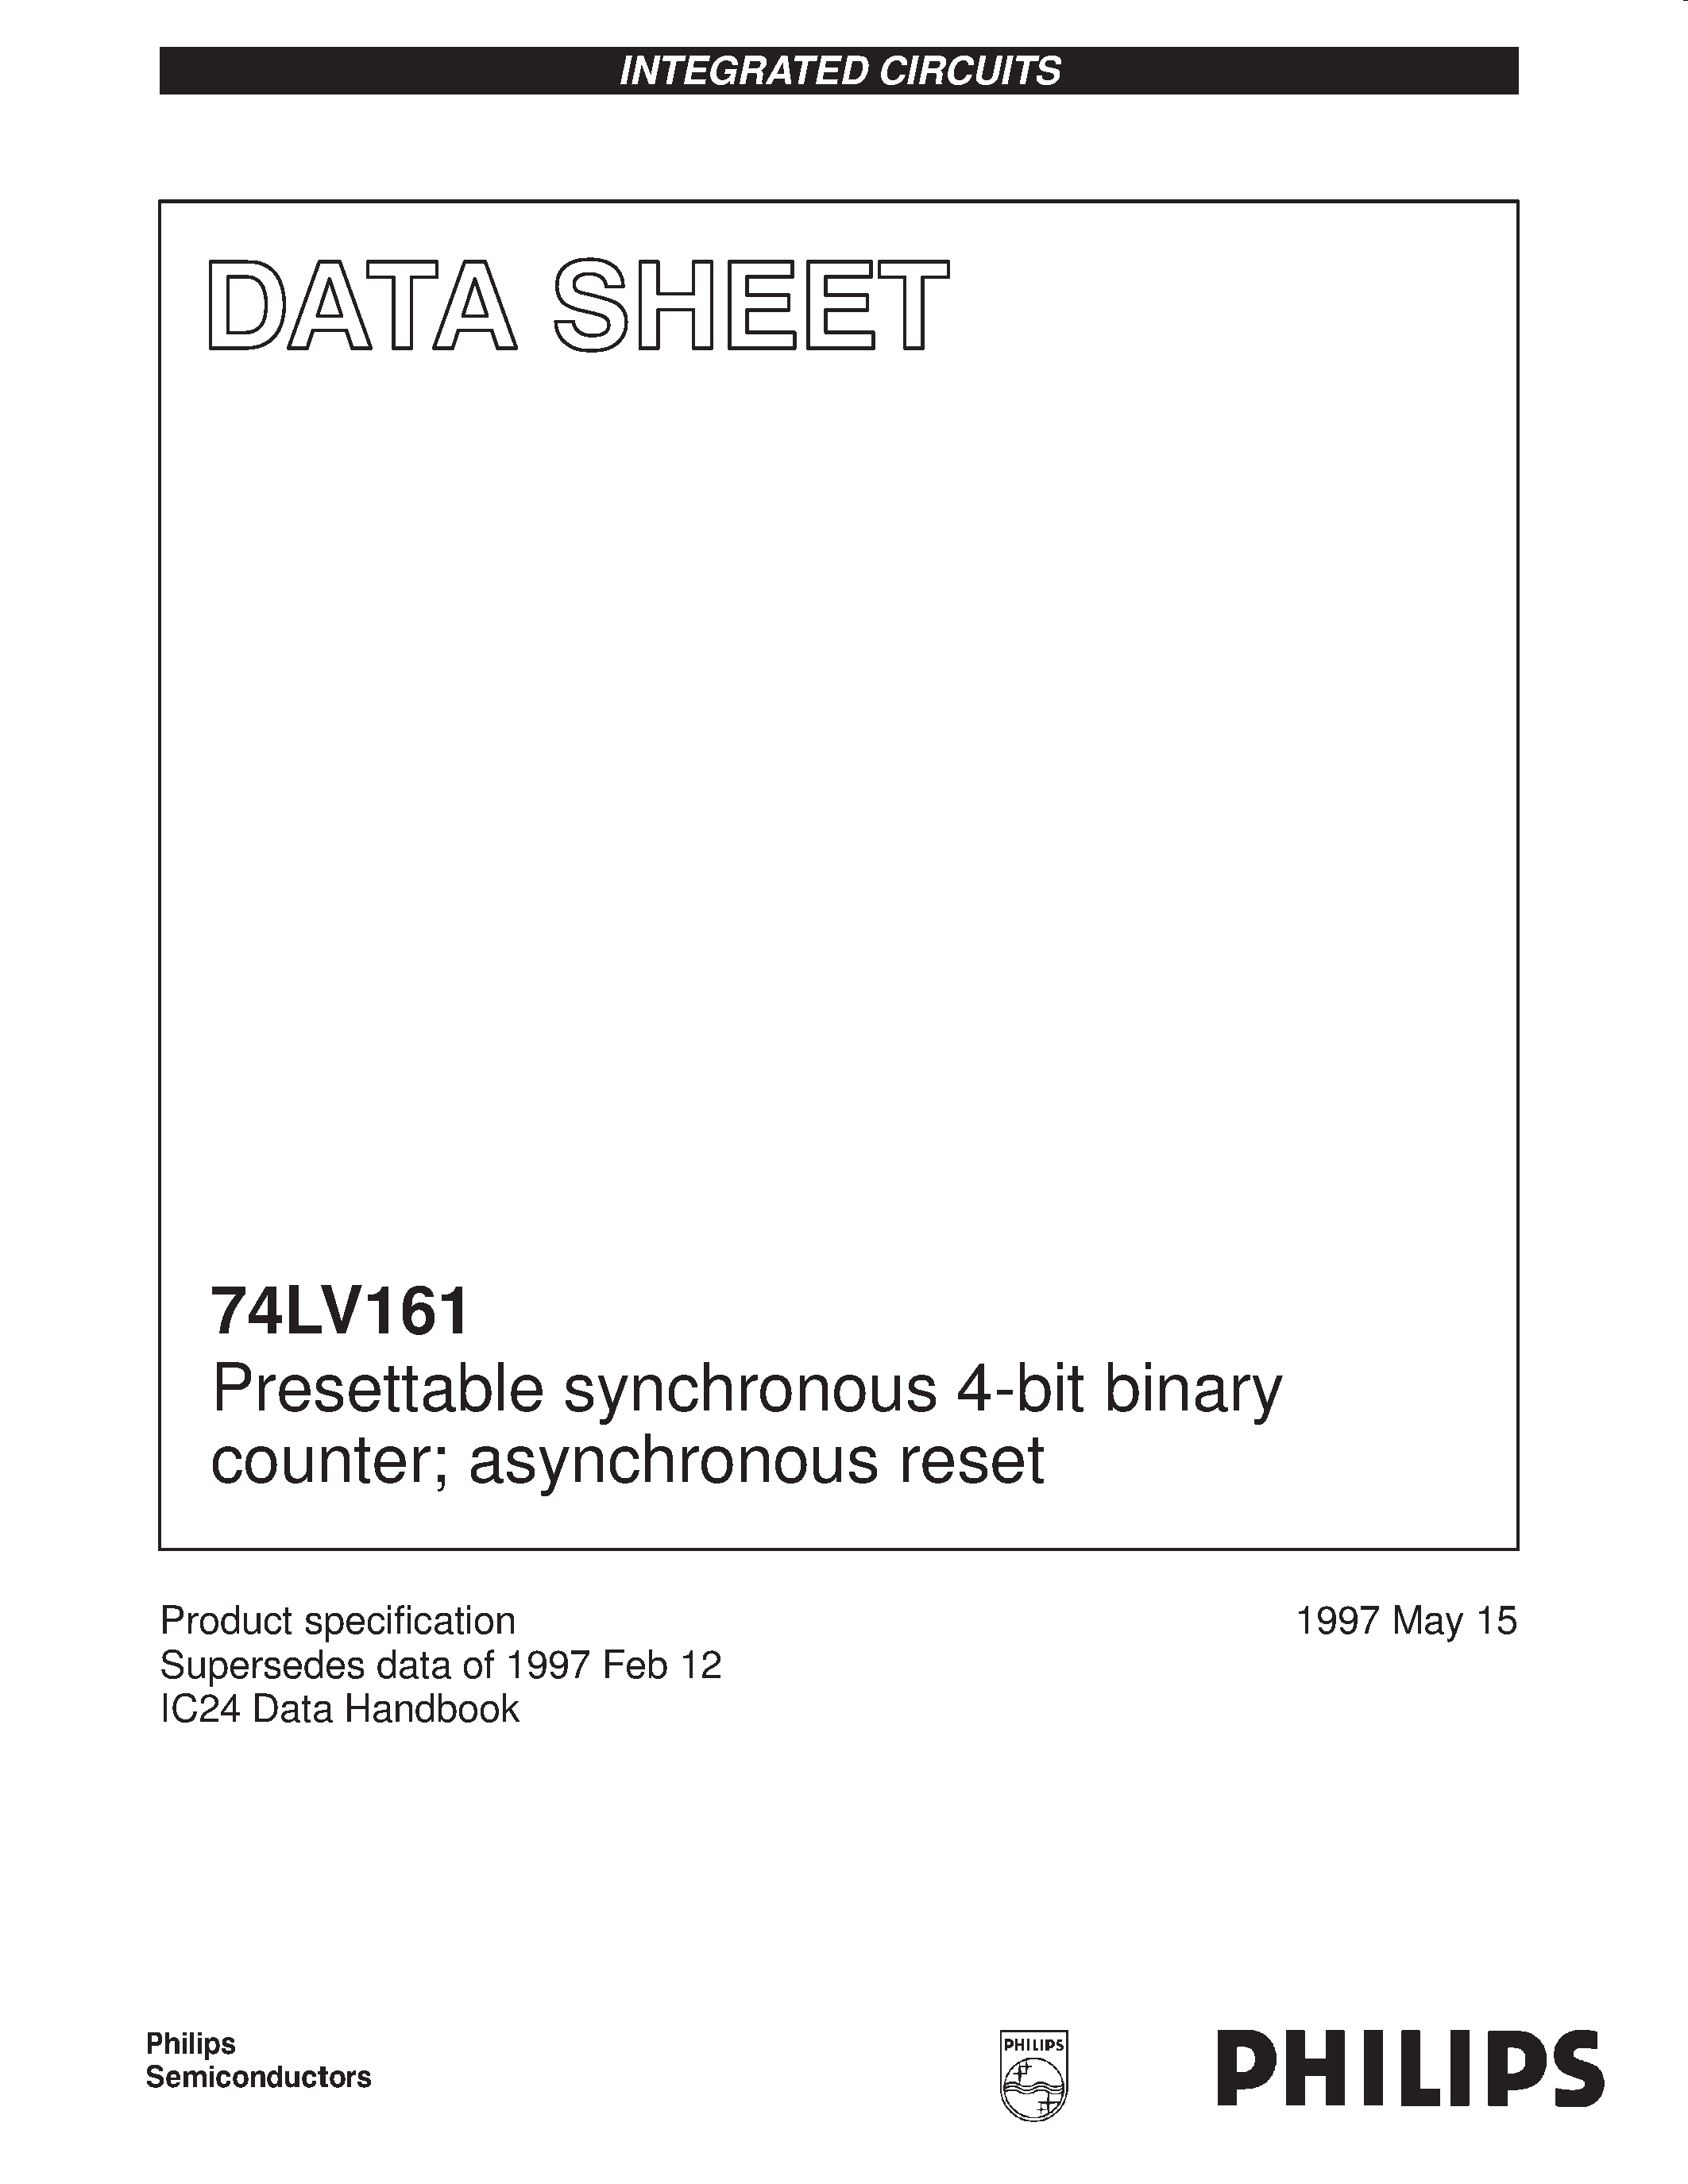 Datasheet 74LV161 - Presettable synchronous 4-bit binary counter; asynchronous reset page 1